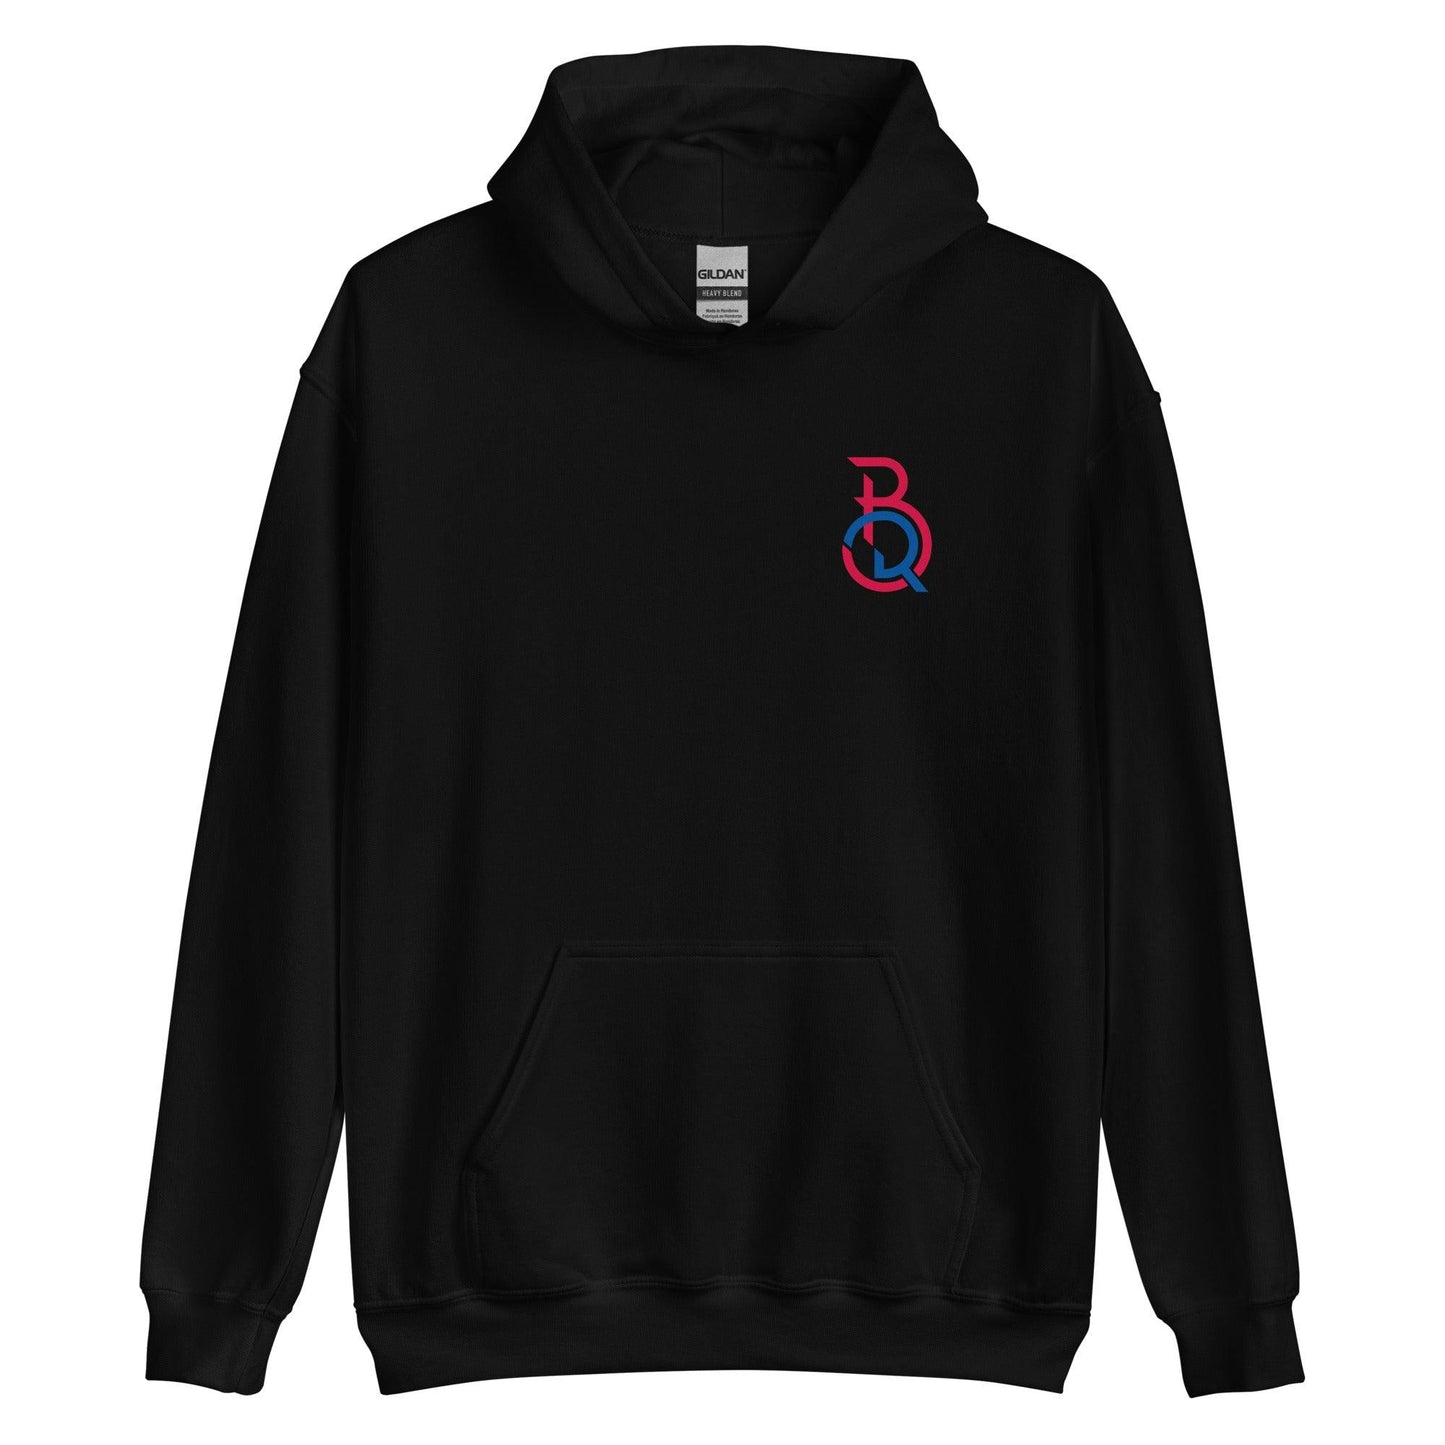 Baron Radcliff “Signature” Hoodie - Fan Arch